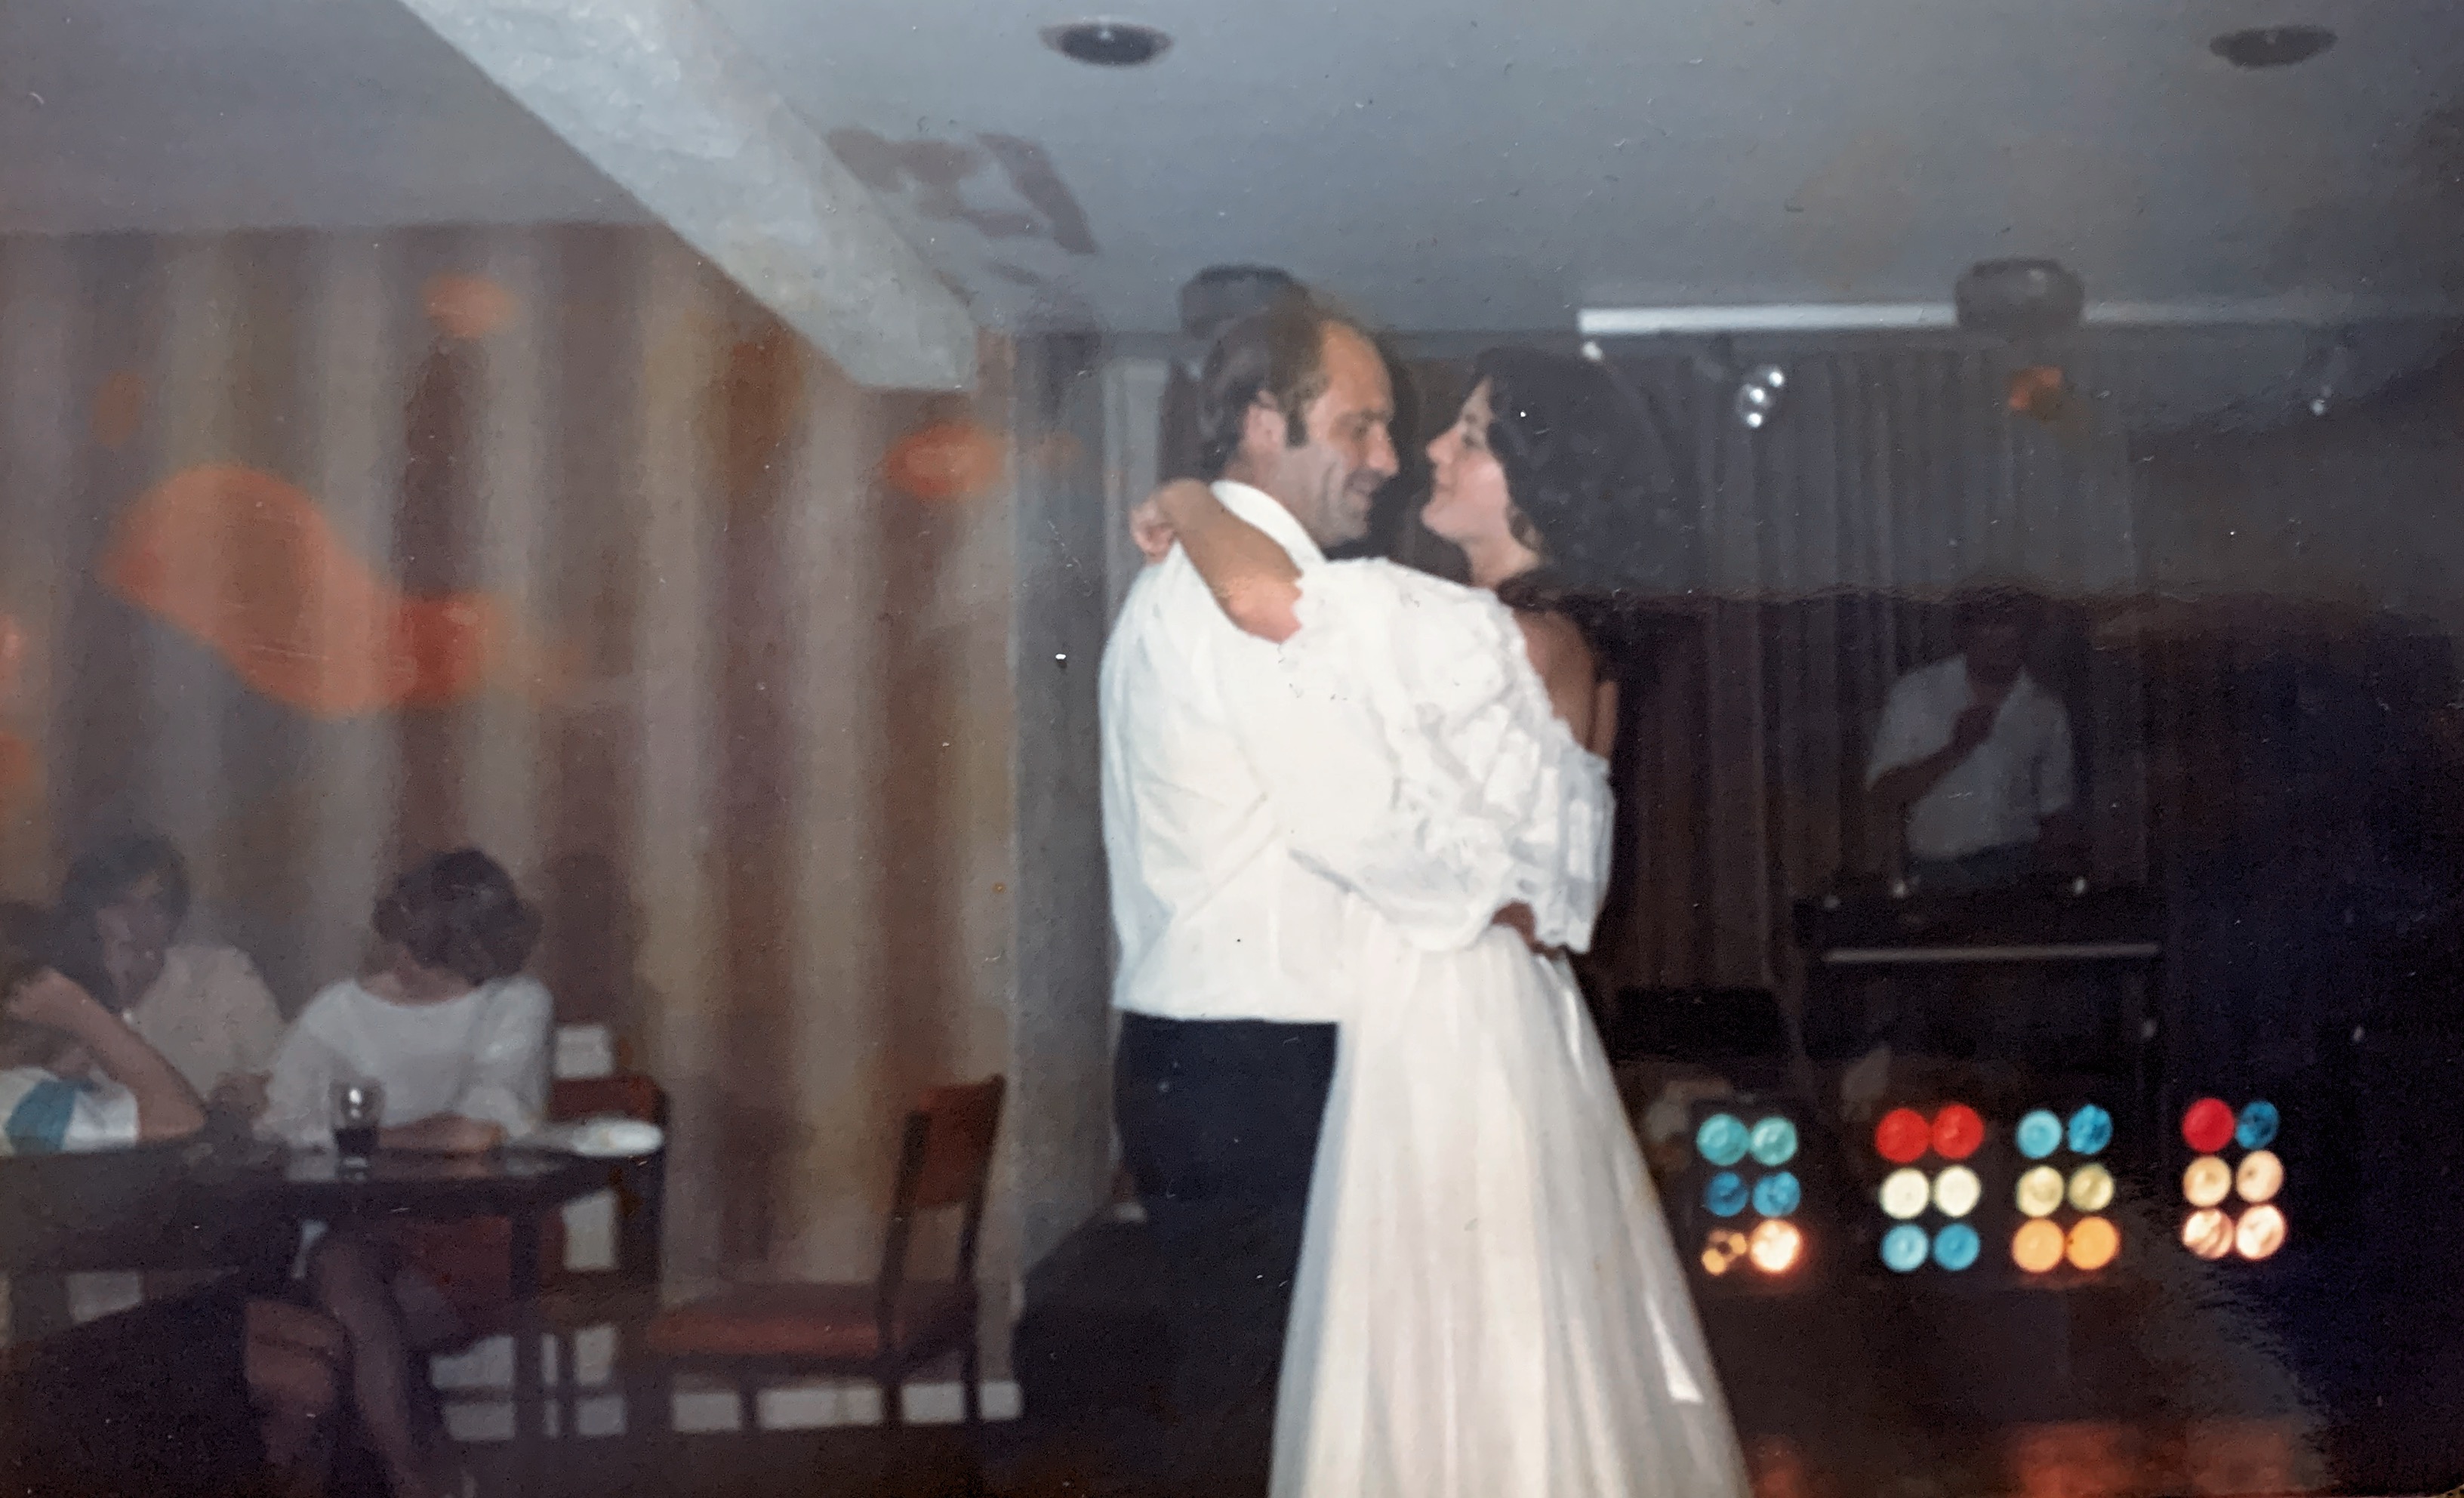 August 1983 mum and dads wedding - bith no longer with us 